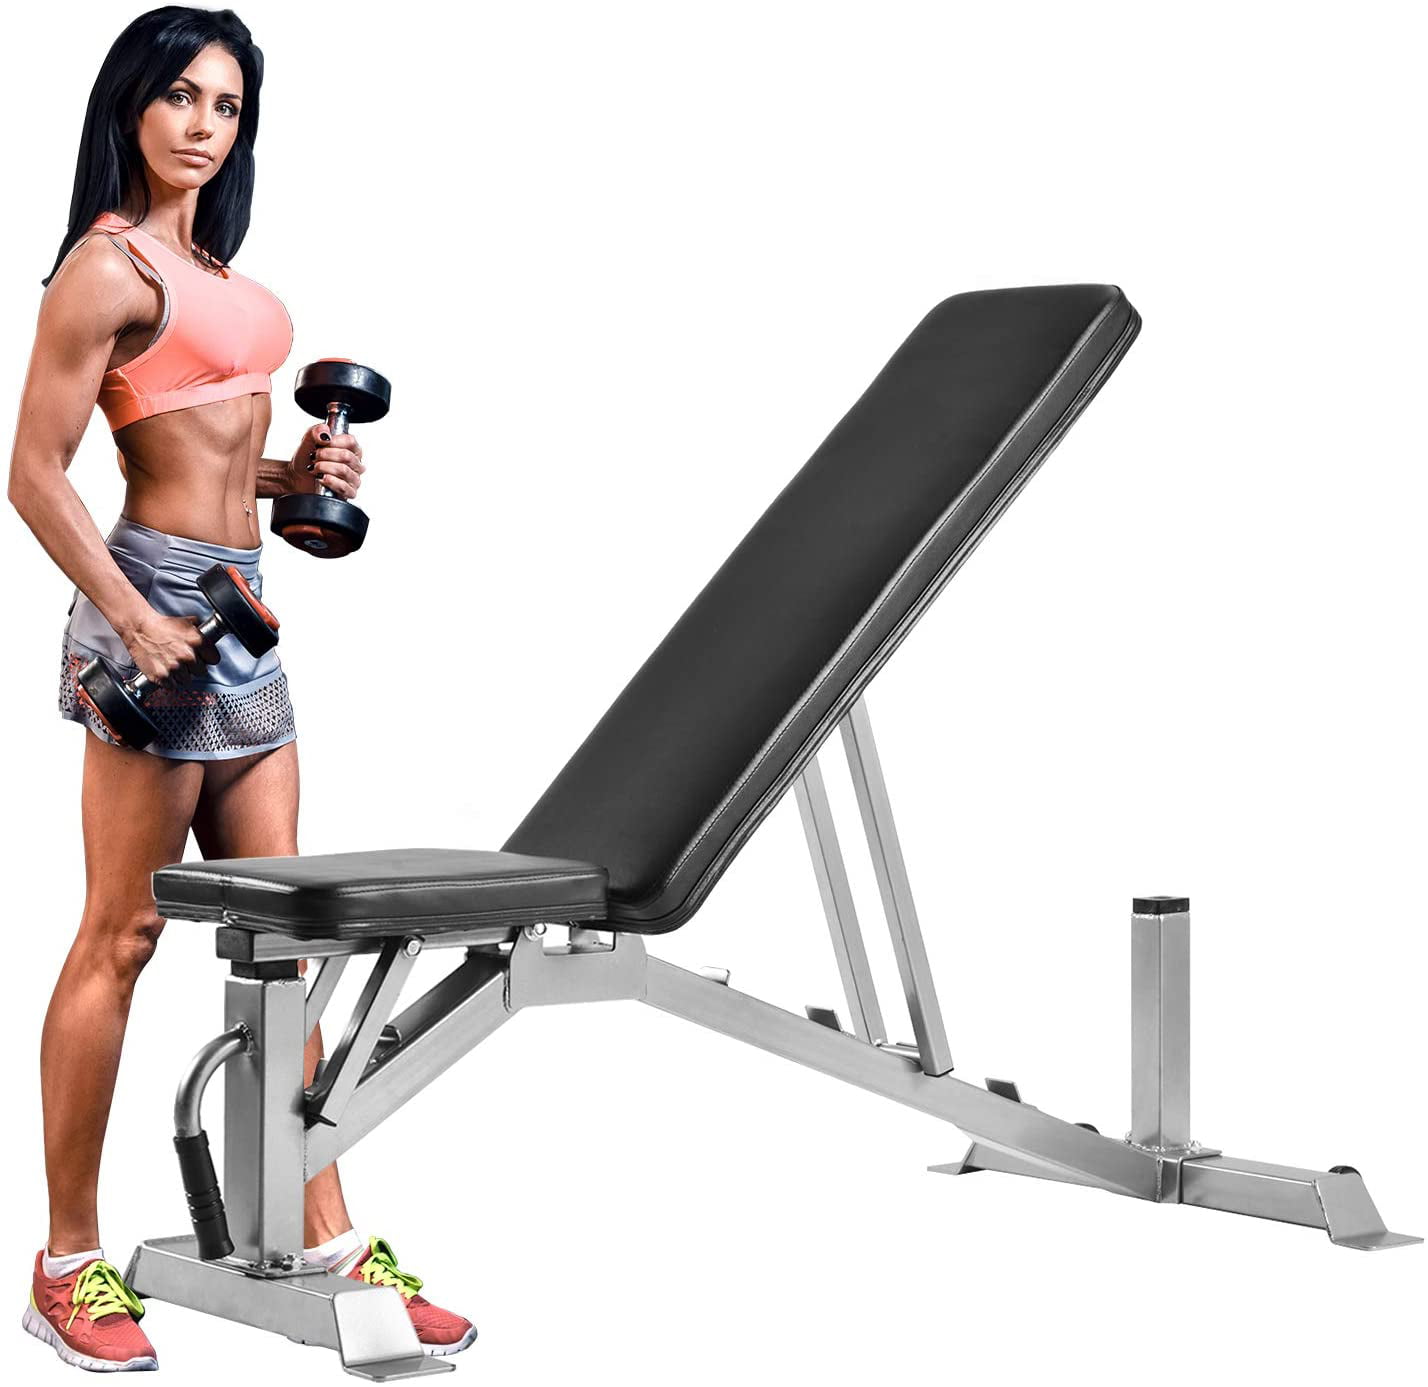 Weight Bench Adjustable Incline Decline Foldable Full Body Workout Gym Exercise 